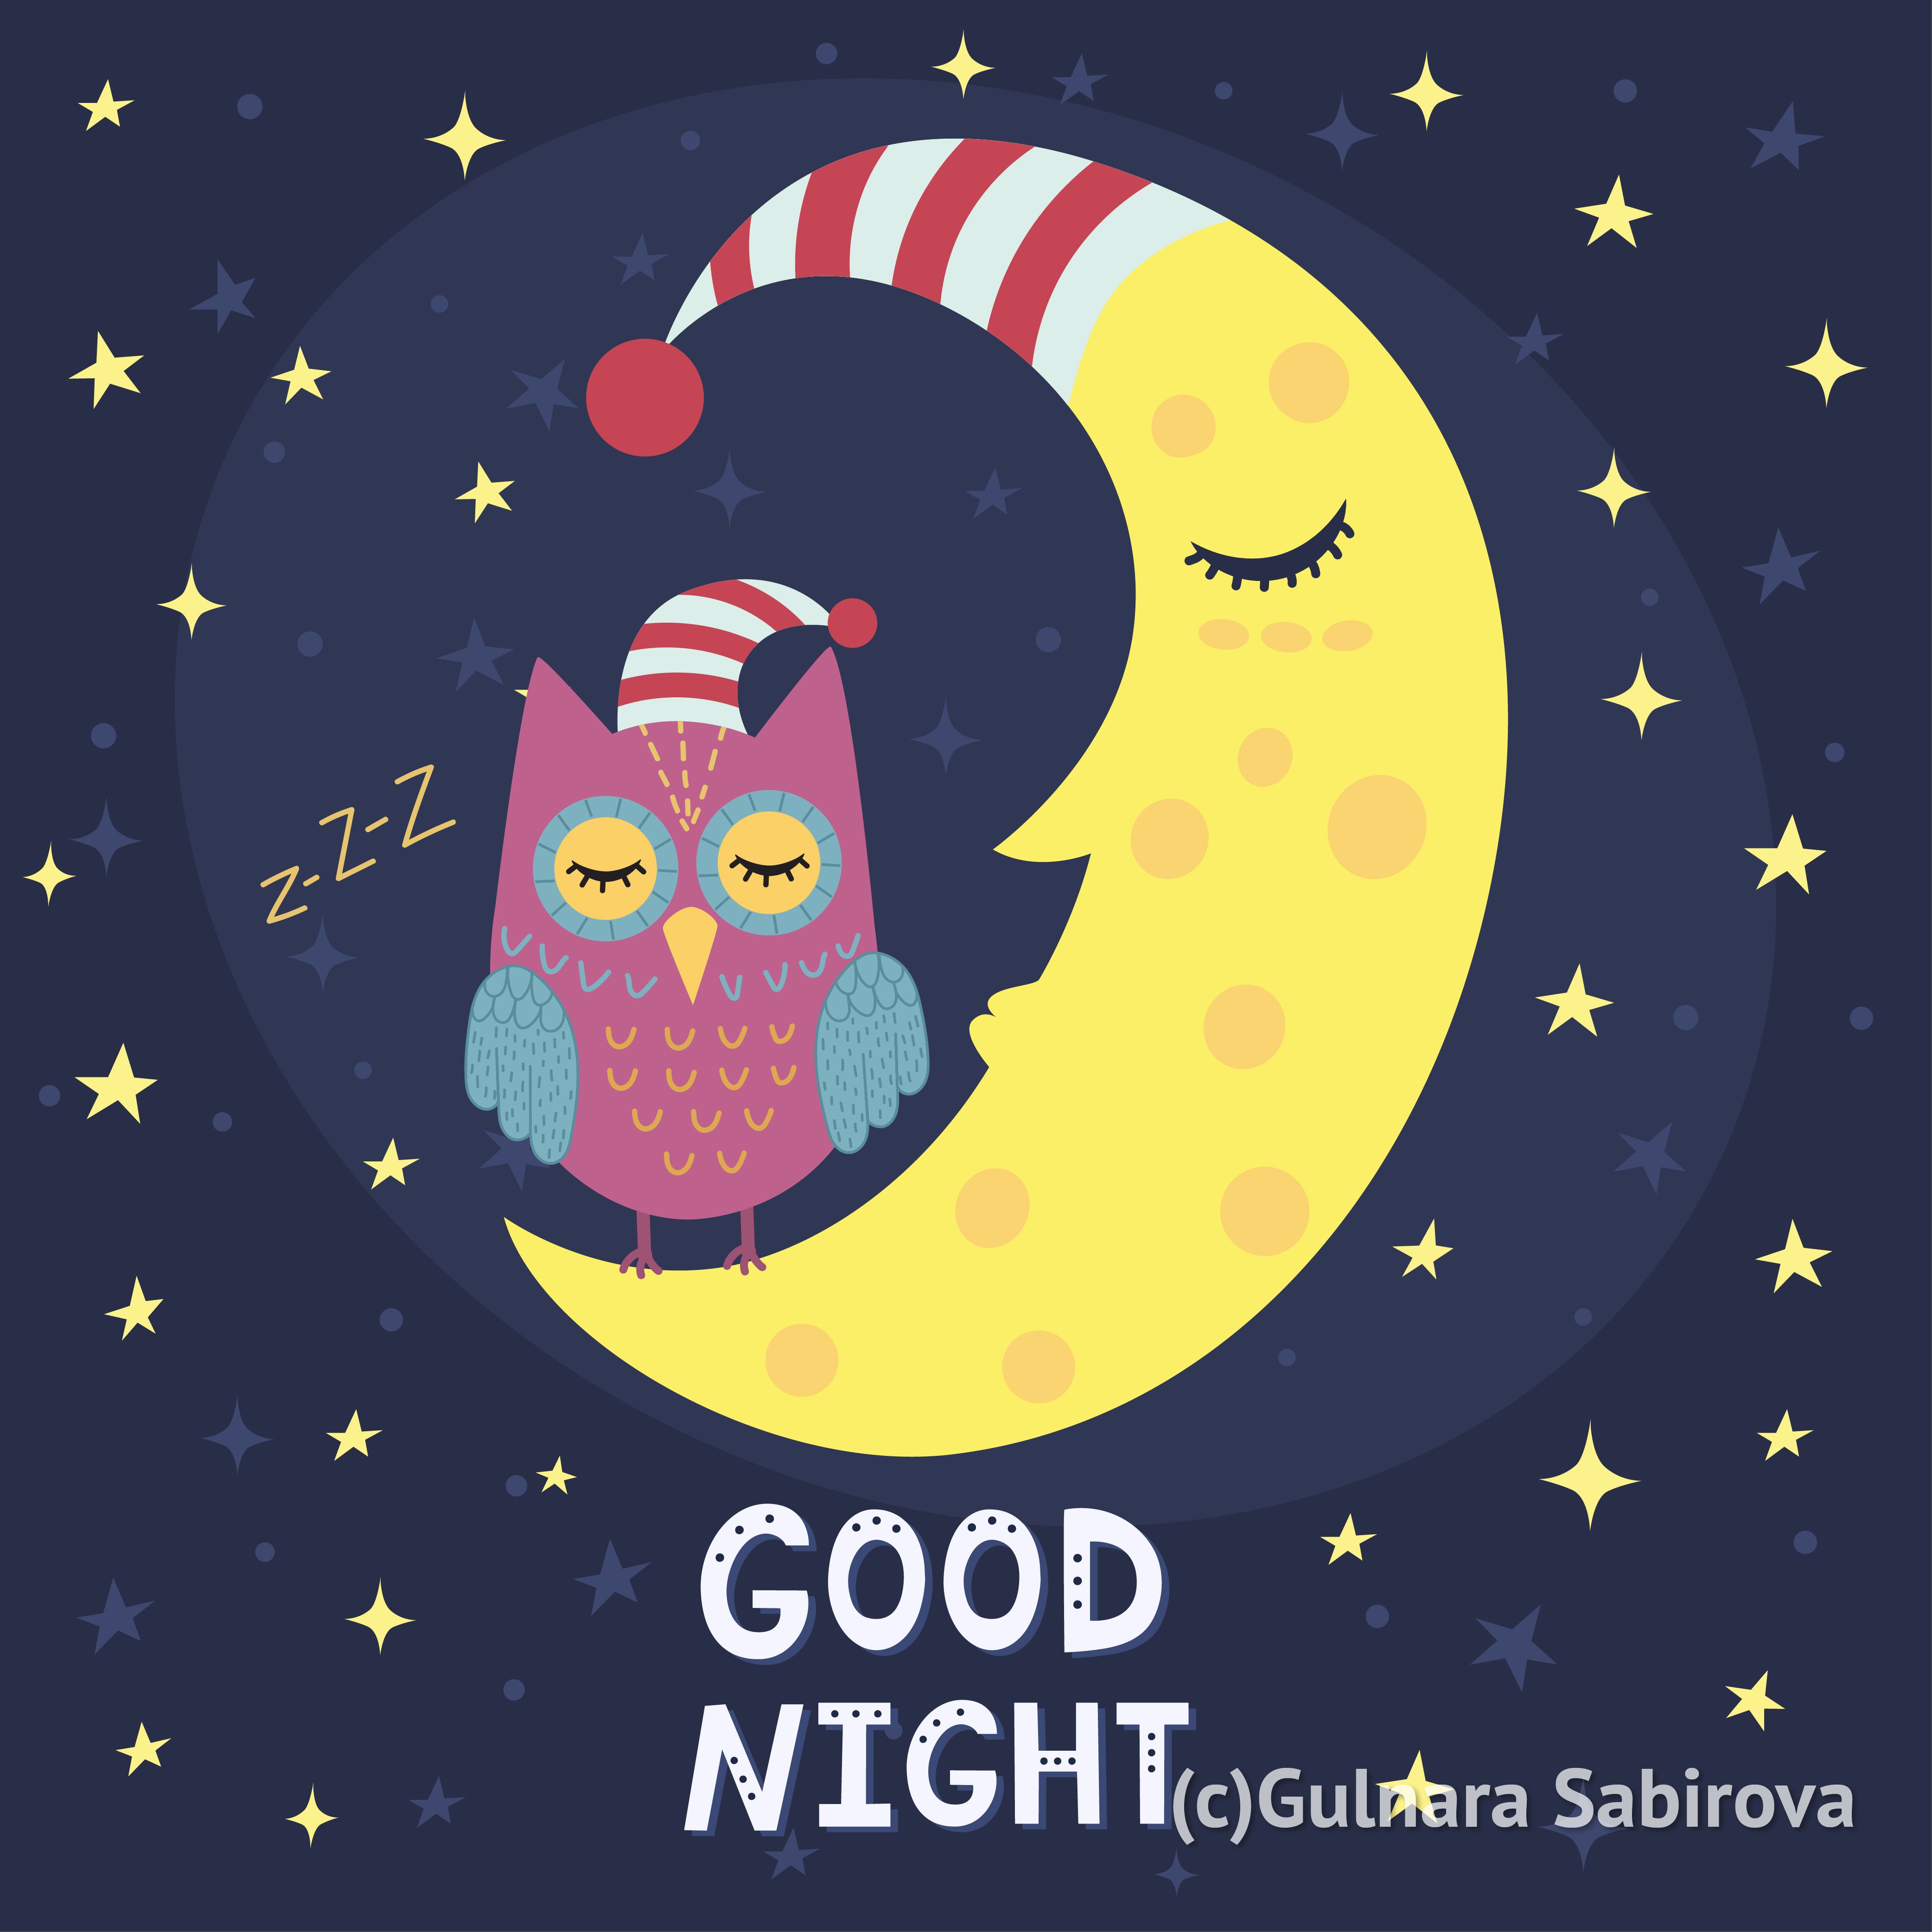 Good night card with a cute owl sitting on the moon Sweet dreams illustration